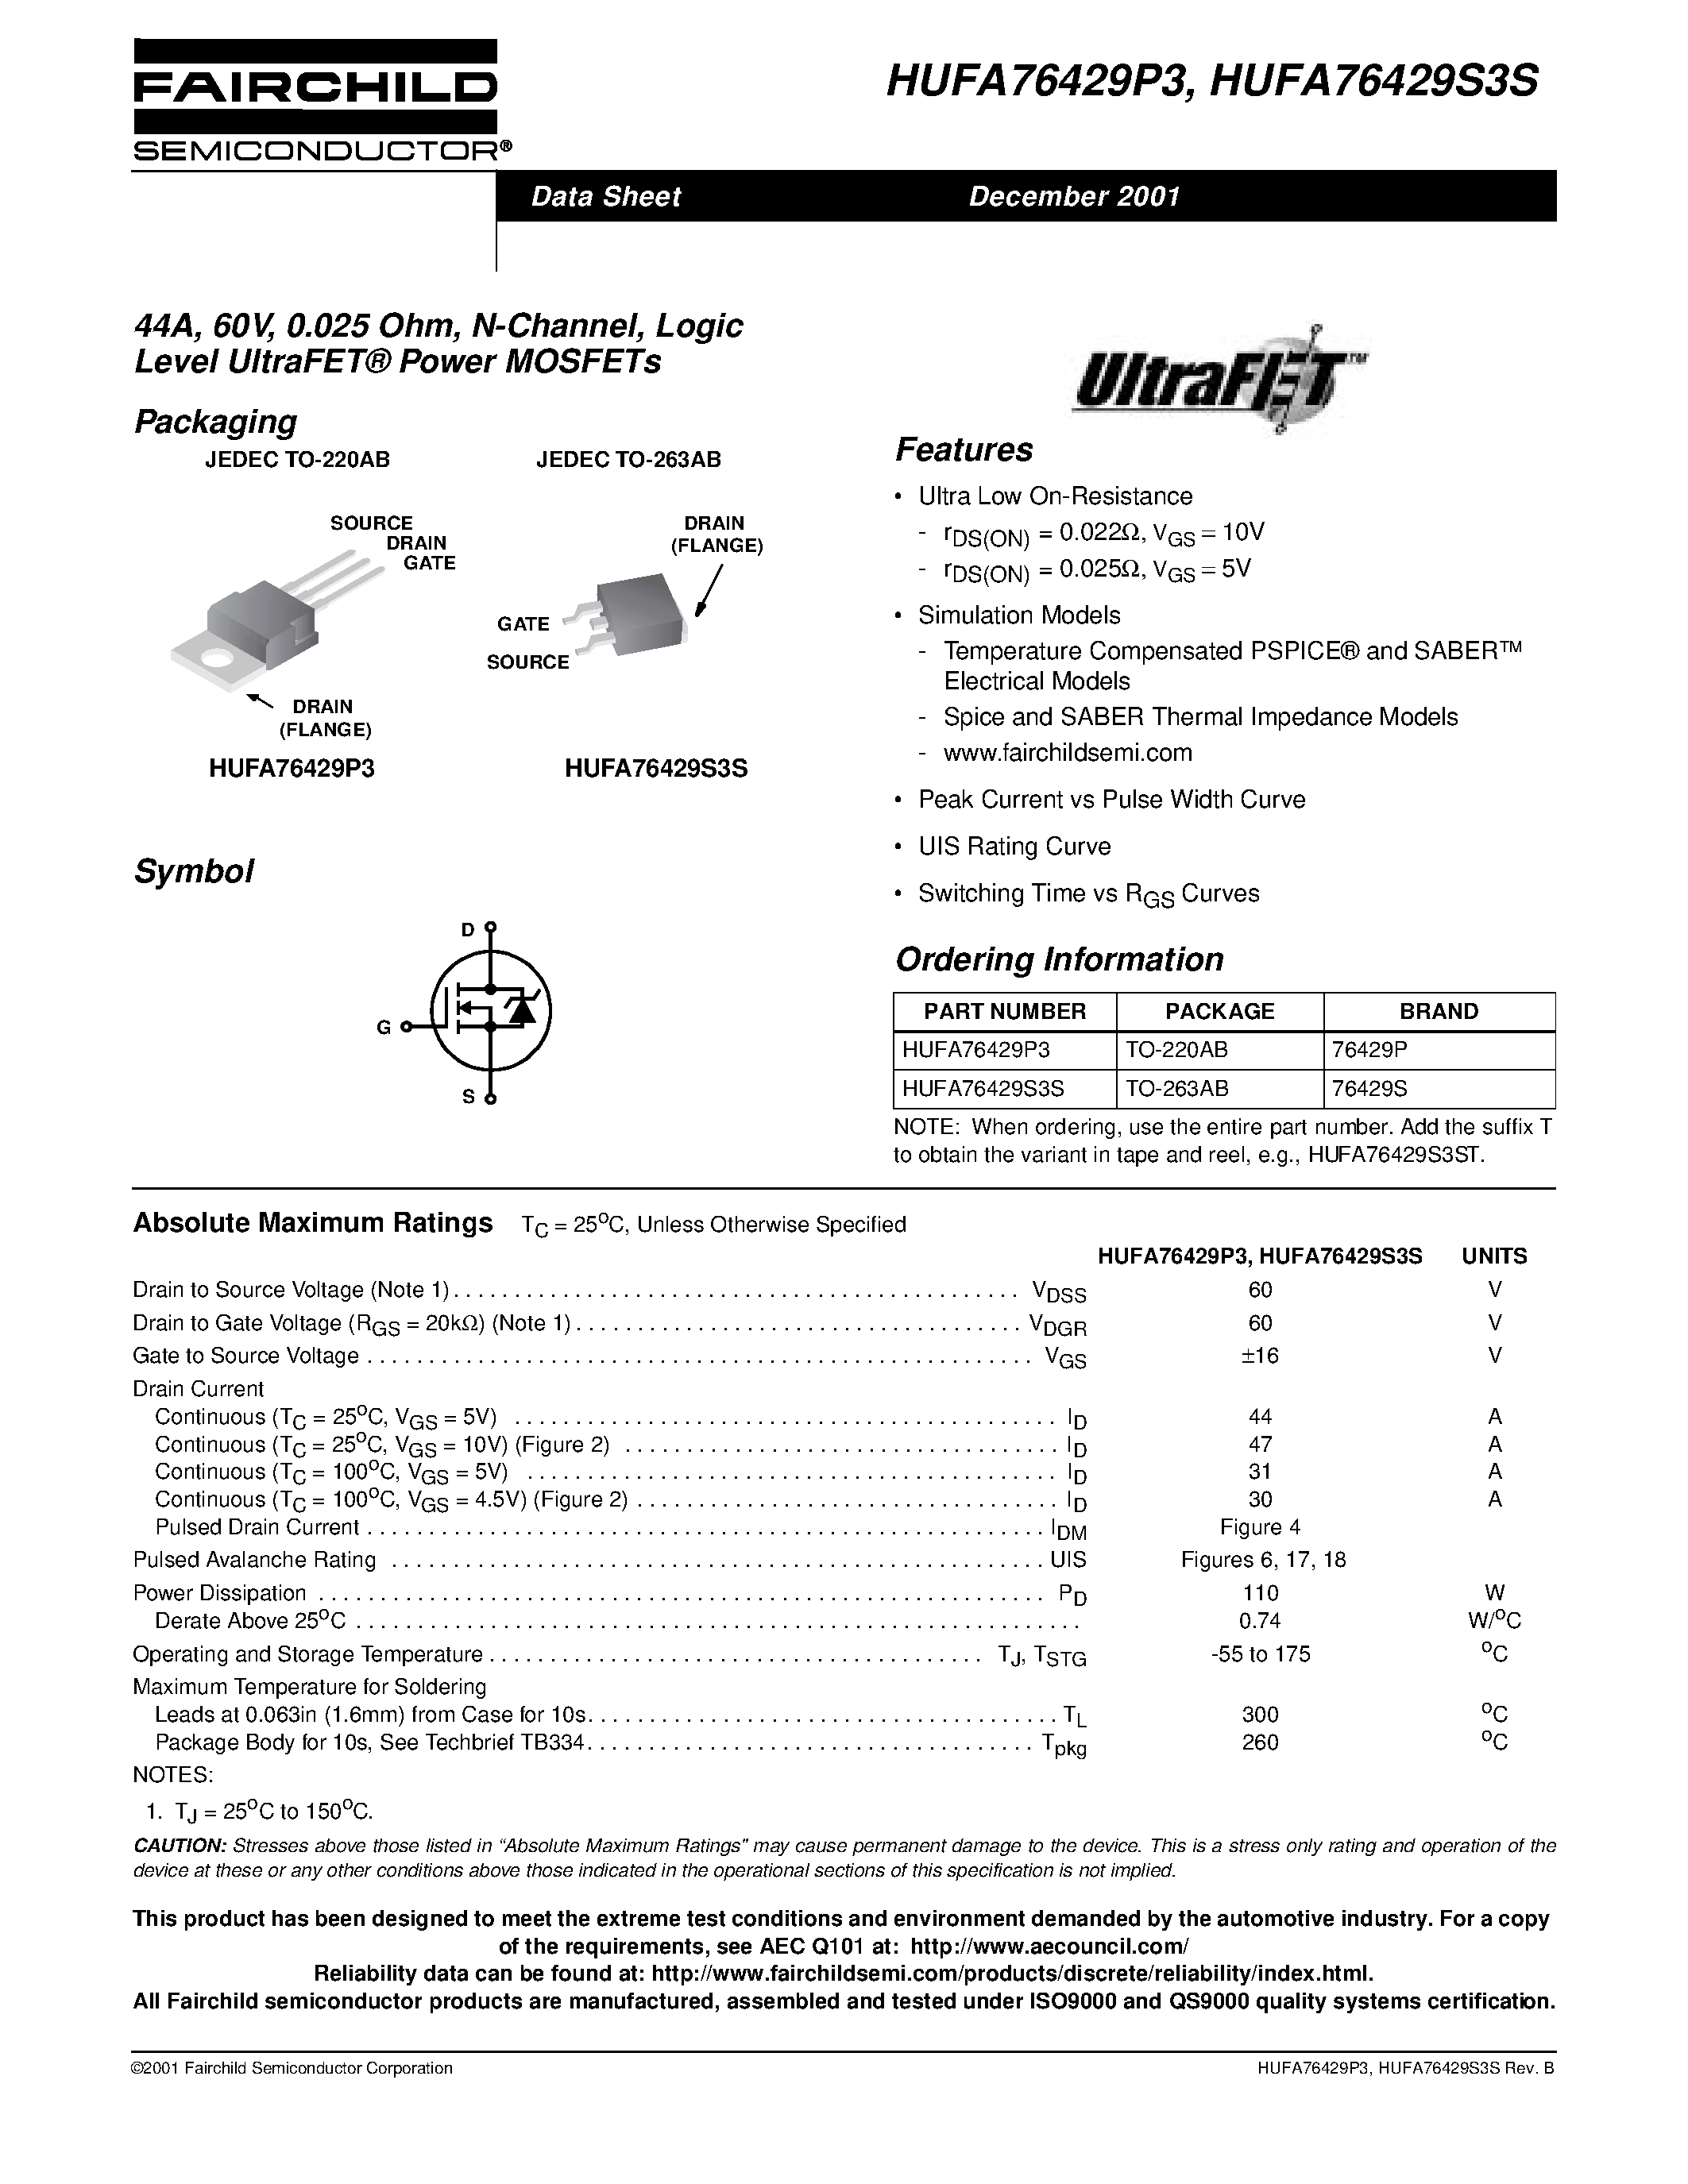 Datasheet HUFA76429P3 - 44A/ 60V/ 0.025 Ohm/ N-Channel/ Logic Level UltraFET Power MOSFETs page 1